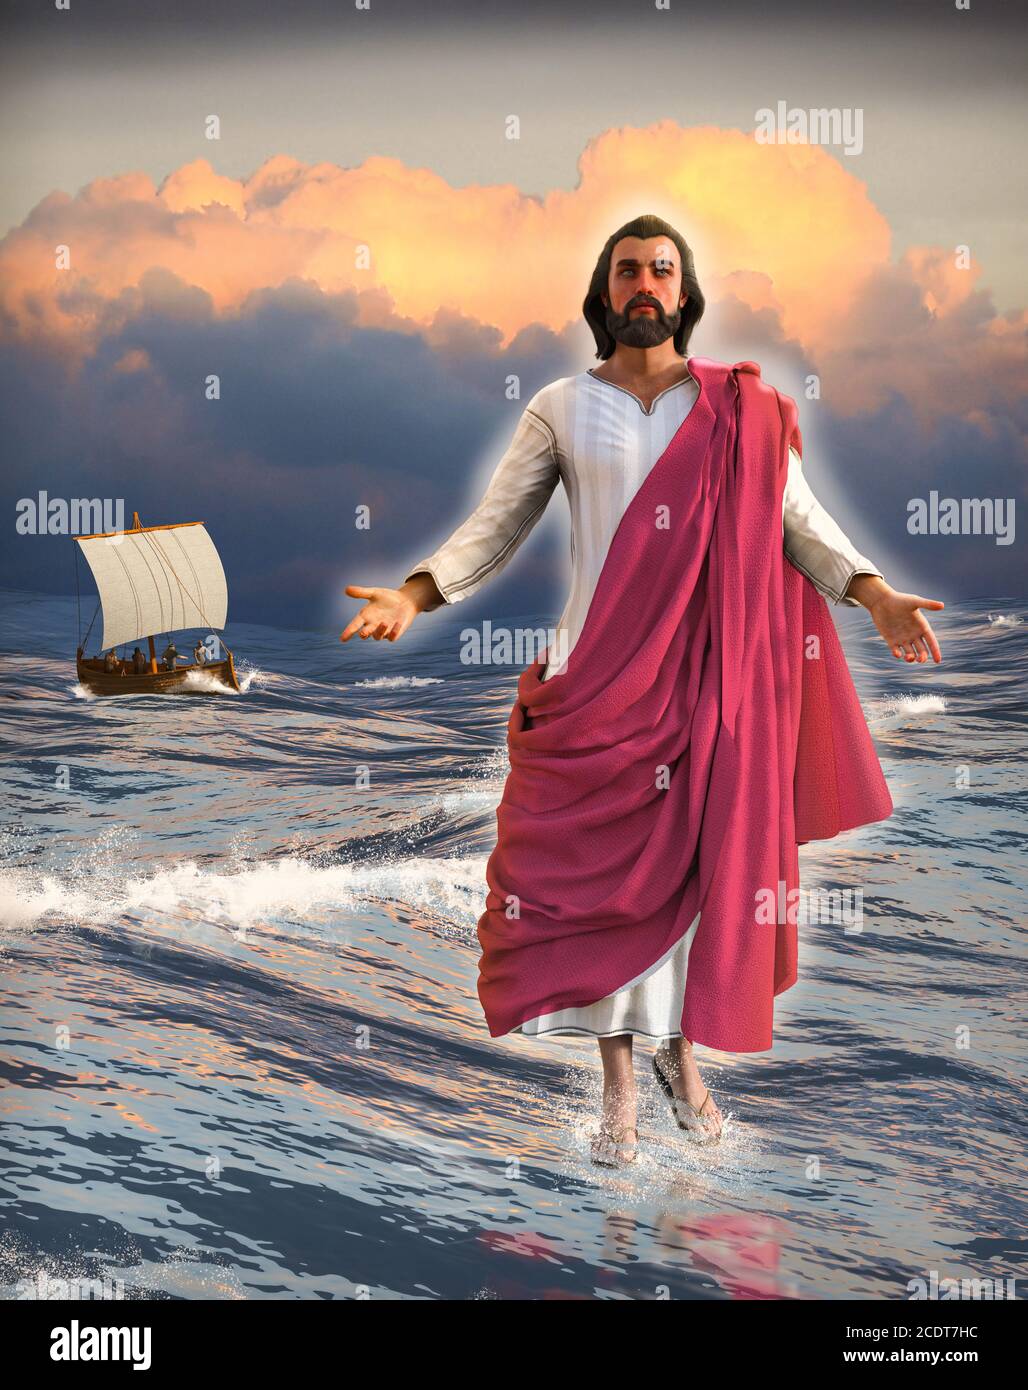 Jesus Christ walking on water of the Sea of Galilee with the disciples in a  fishing boat and a cloudy sunset in the background, 3d render Stock Photo -  Alamy